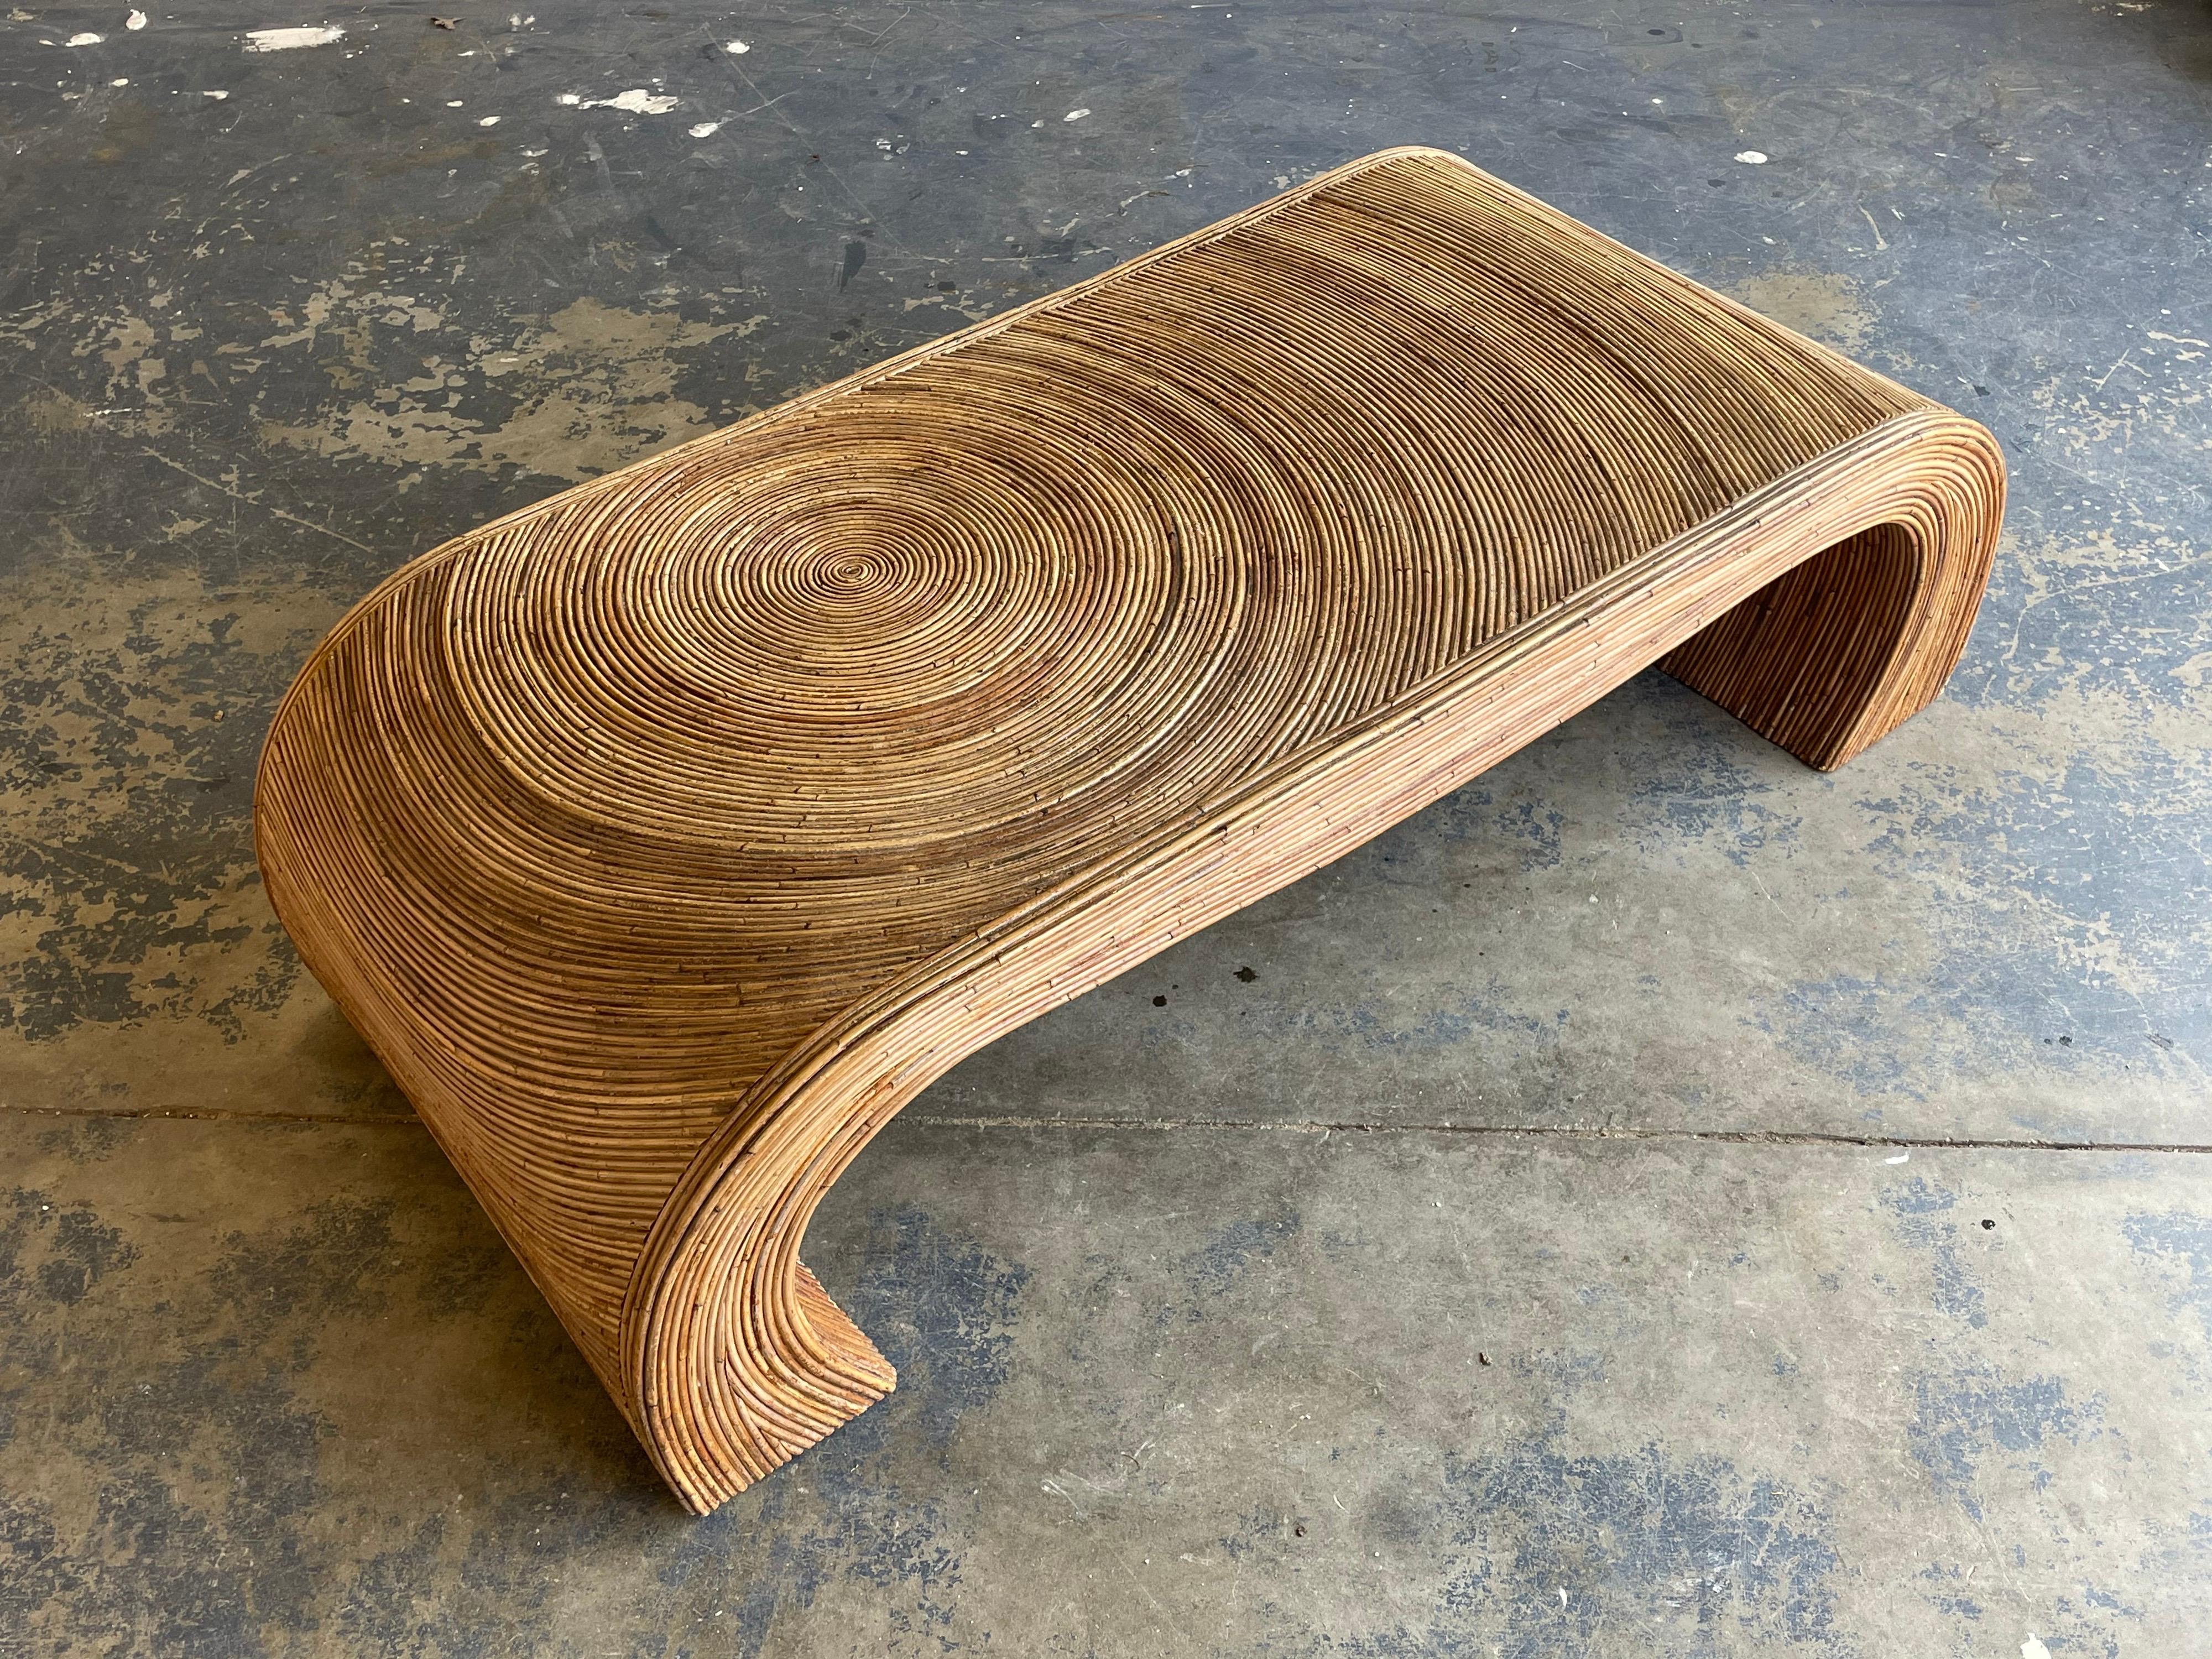 Iconic split reed coffee table after Gabriella Crespi. Wonderful form and use of materials. Blends well with other organic modernism designs such as Paul Laszlo, Paul Frankl, Vladimir Kagan, and T.H. Robsjohn-Gibbings.